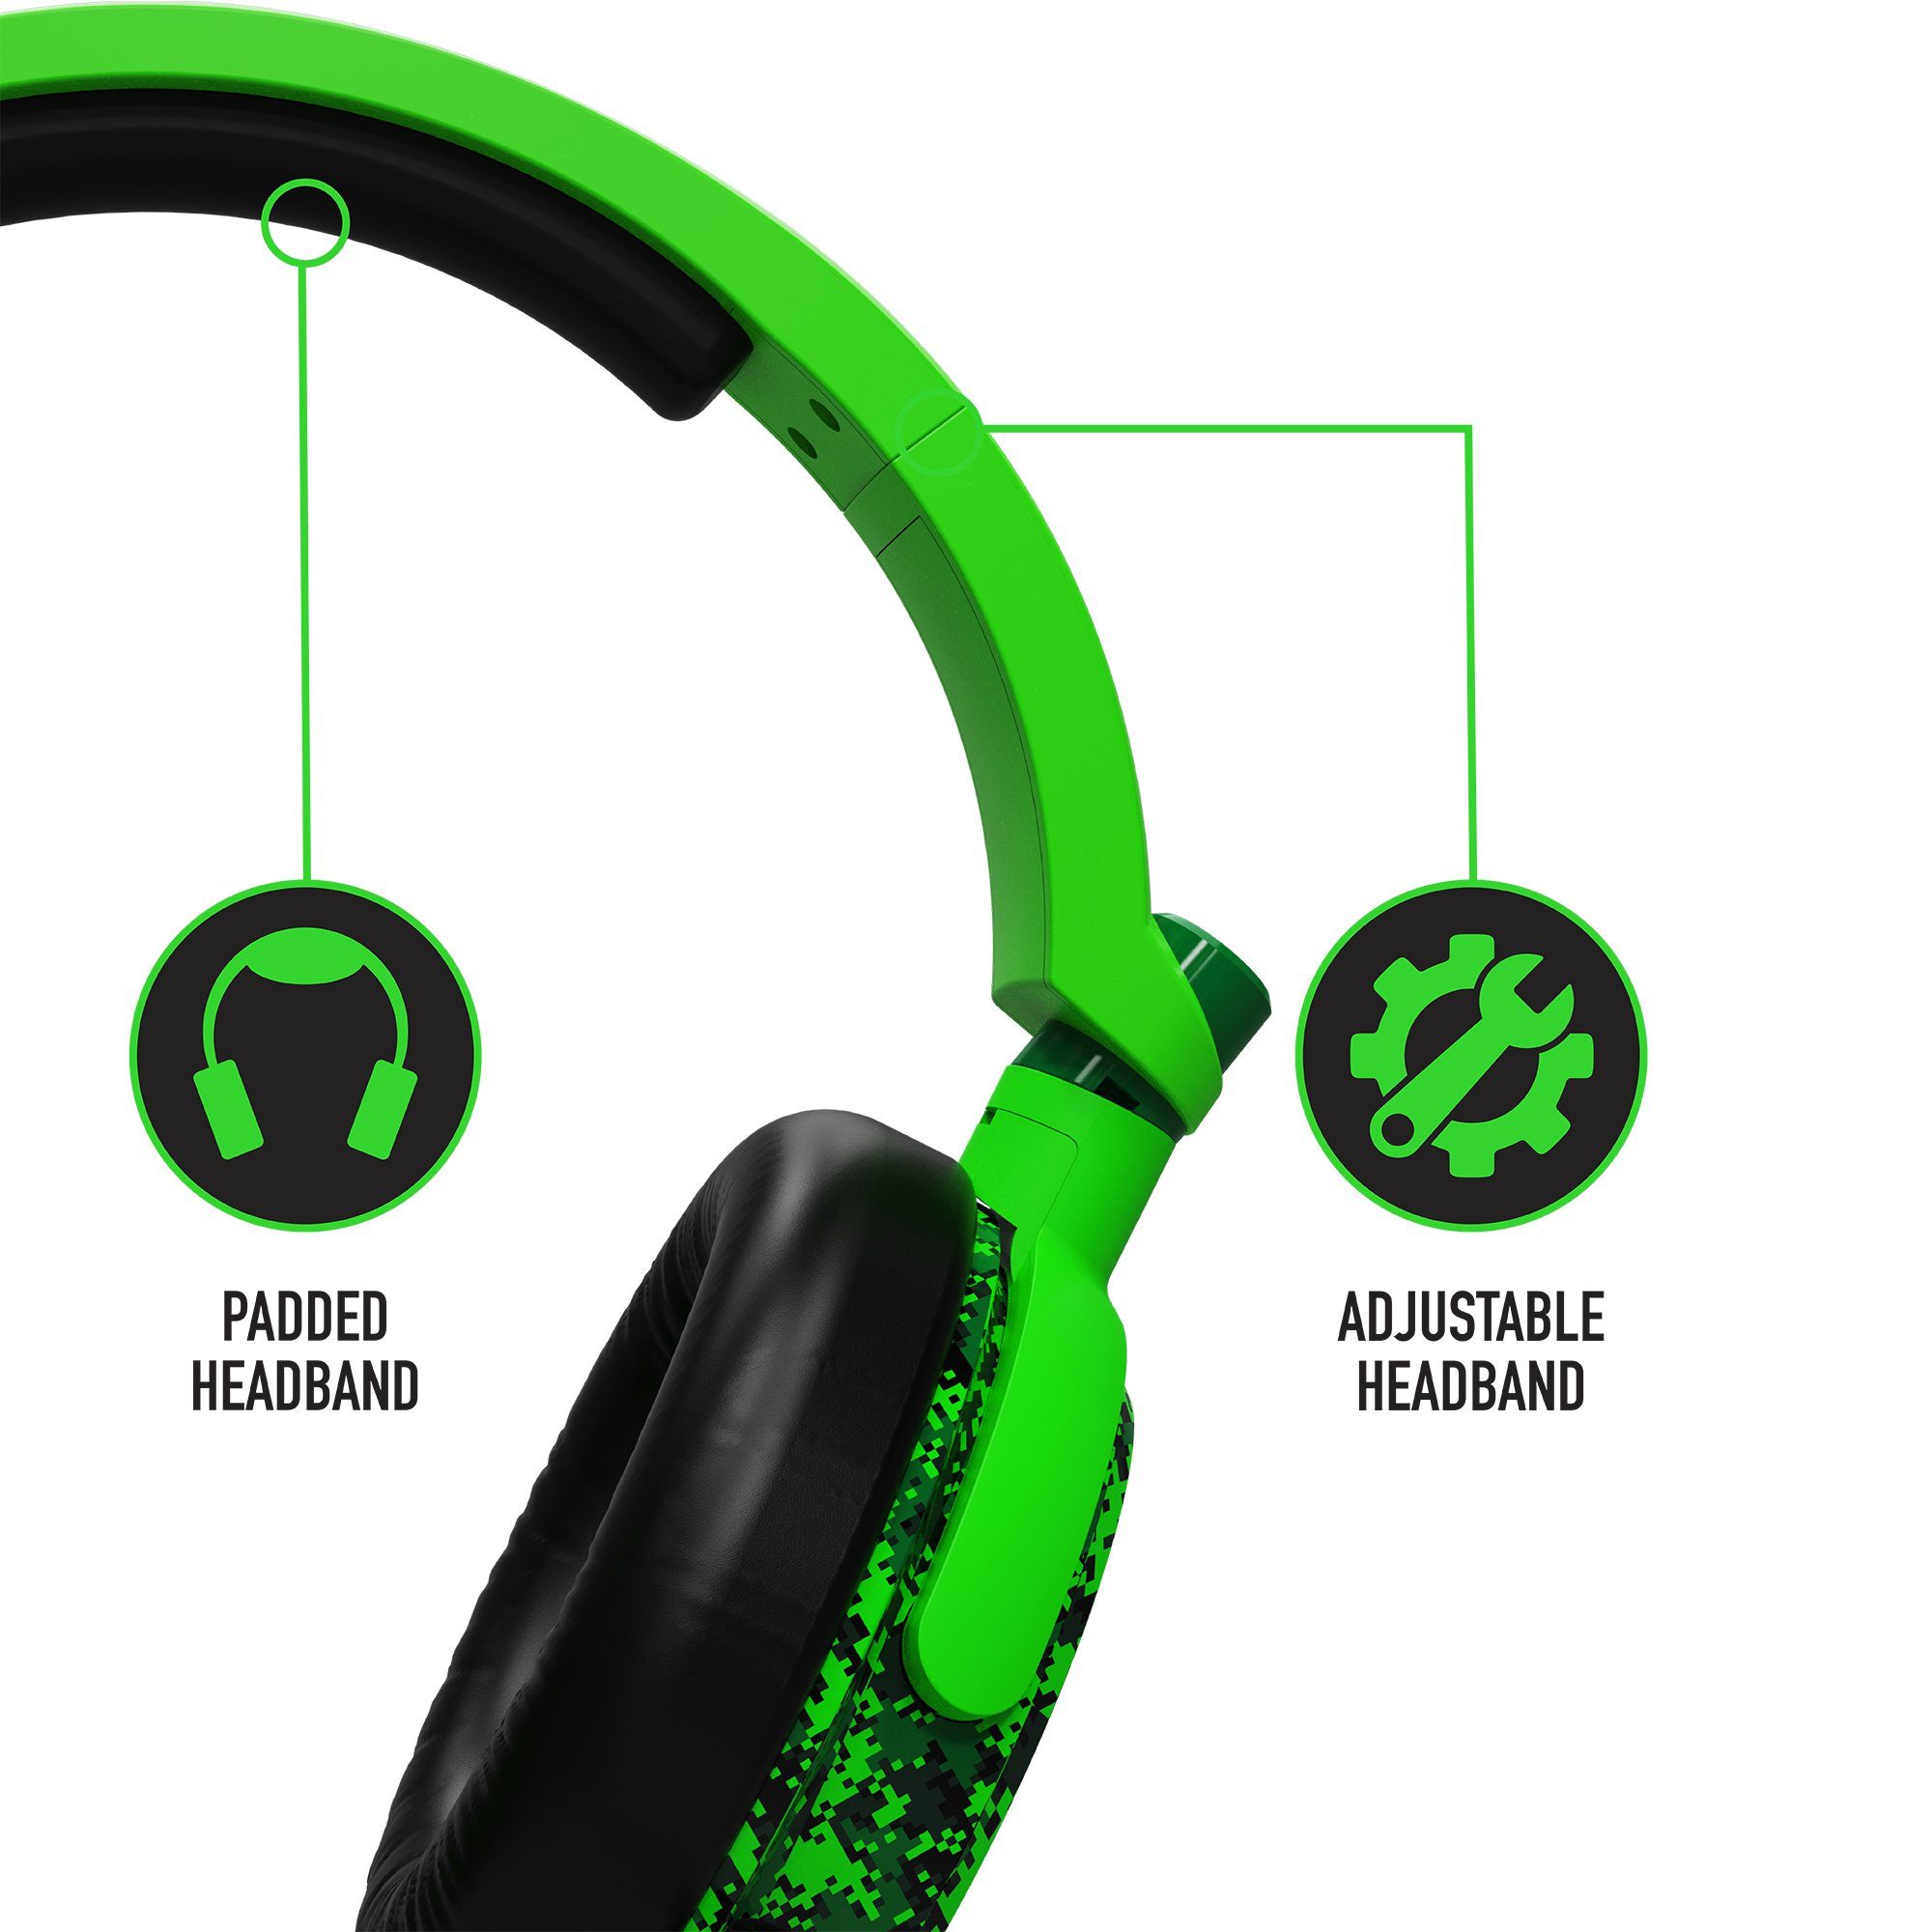 Stealth Multiformat Gaming-Headset Camo Headset grün camouflage C6-100 Gaming